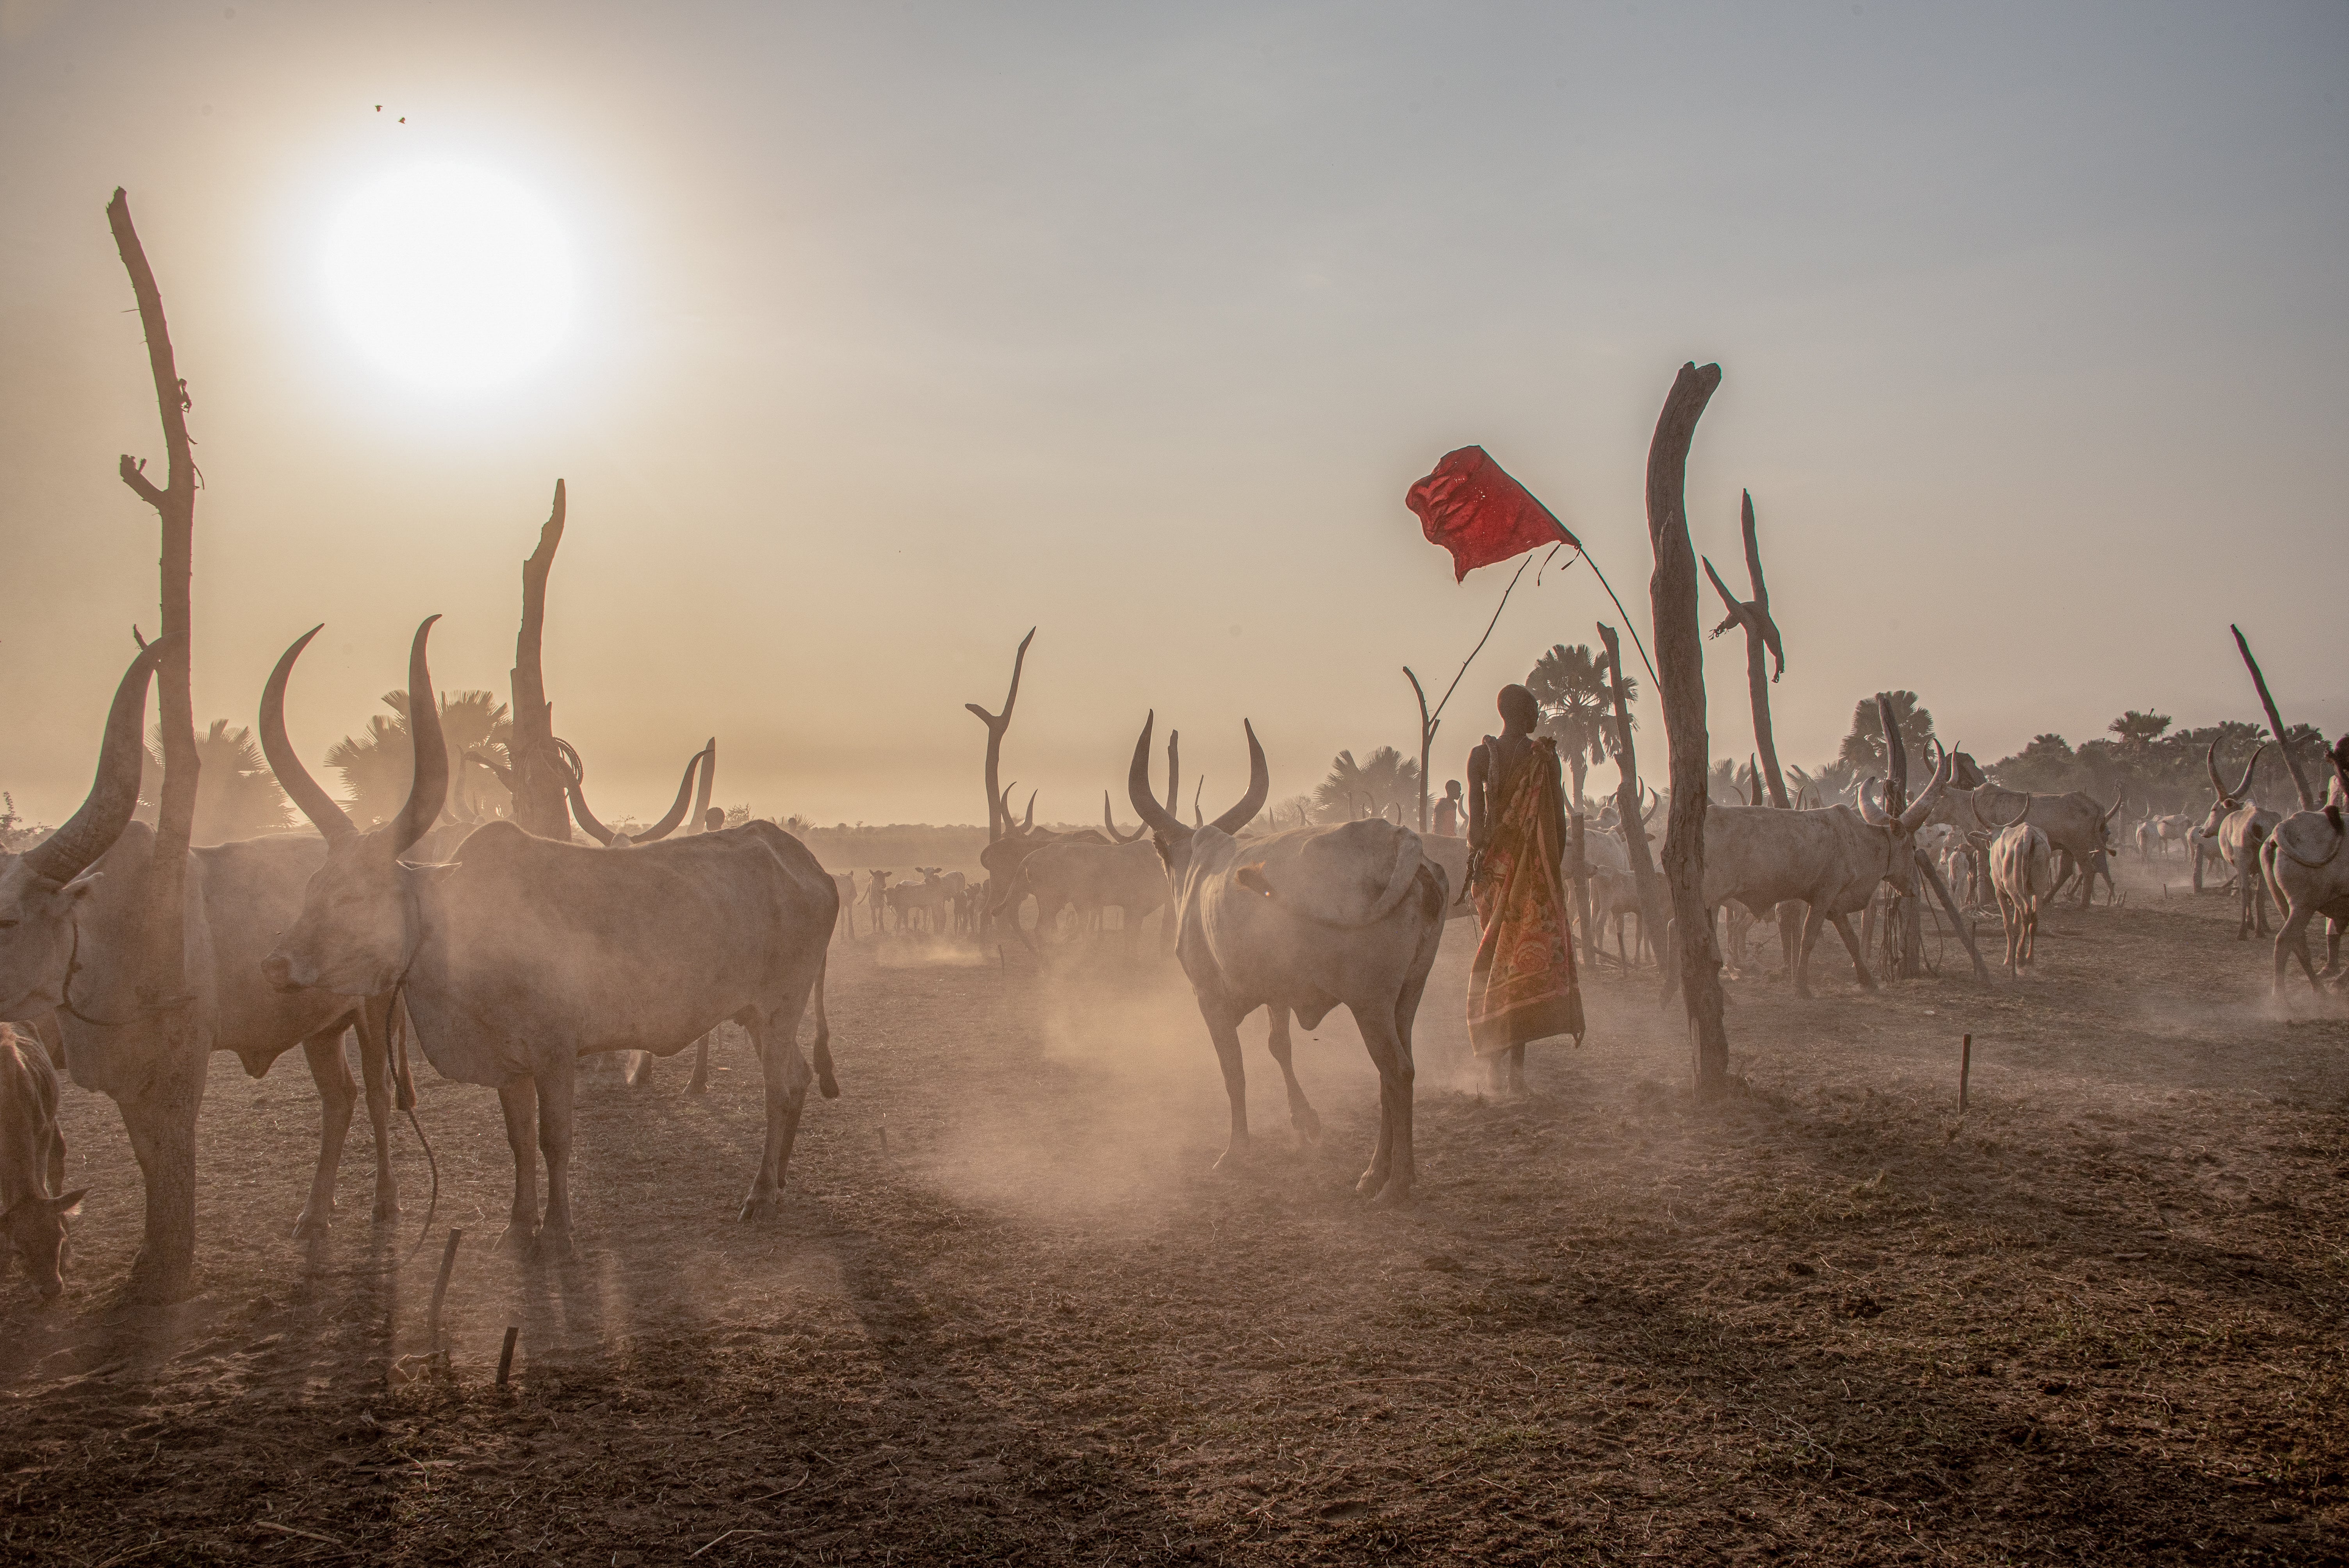 Remote cattle camps can often be subject to raids from neighbouring tribes